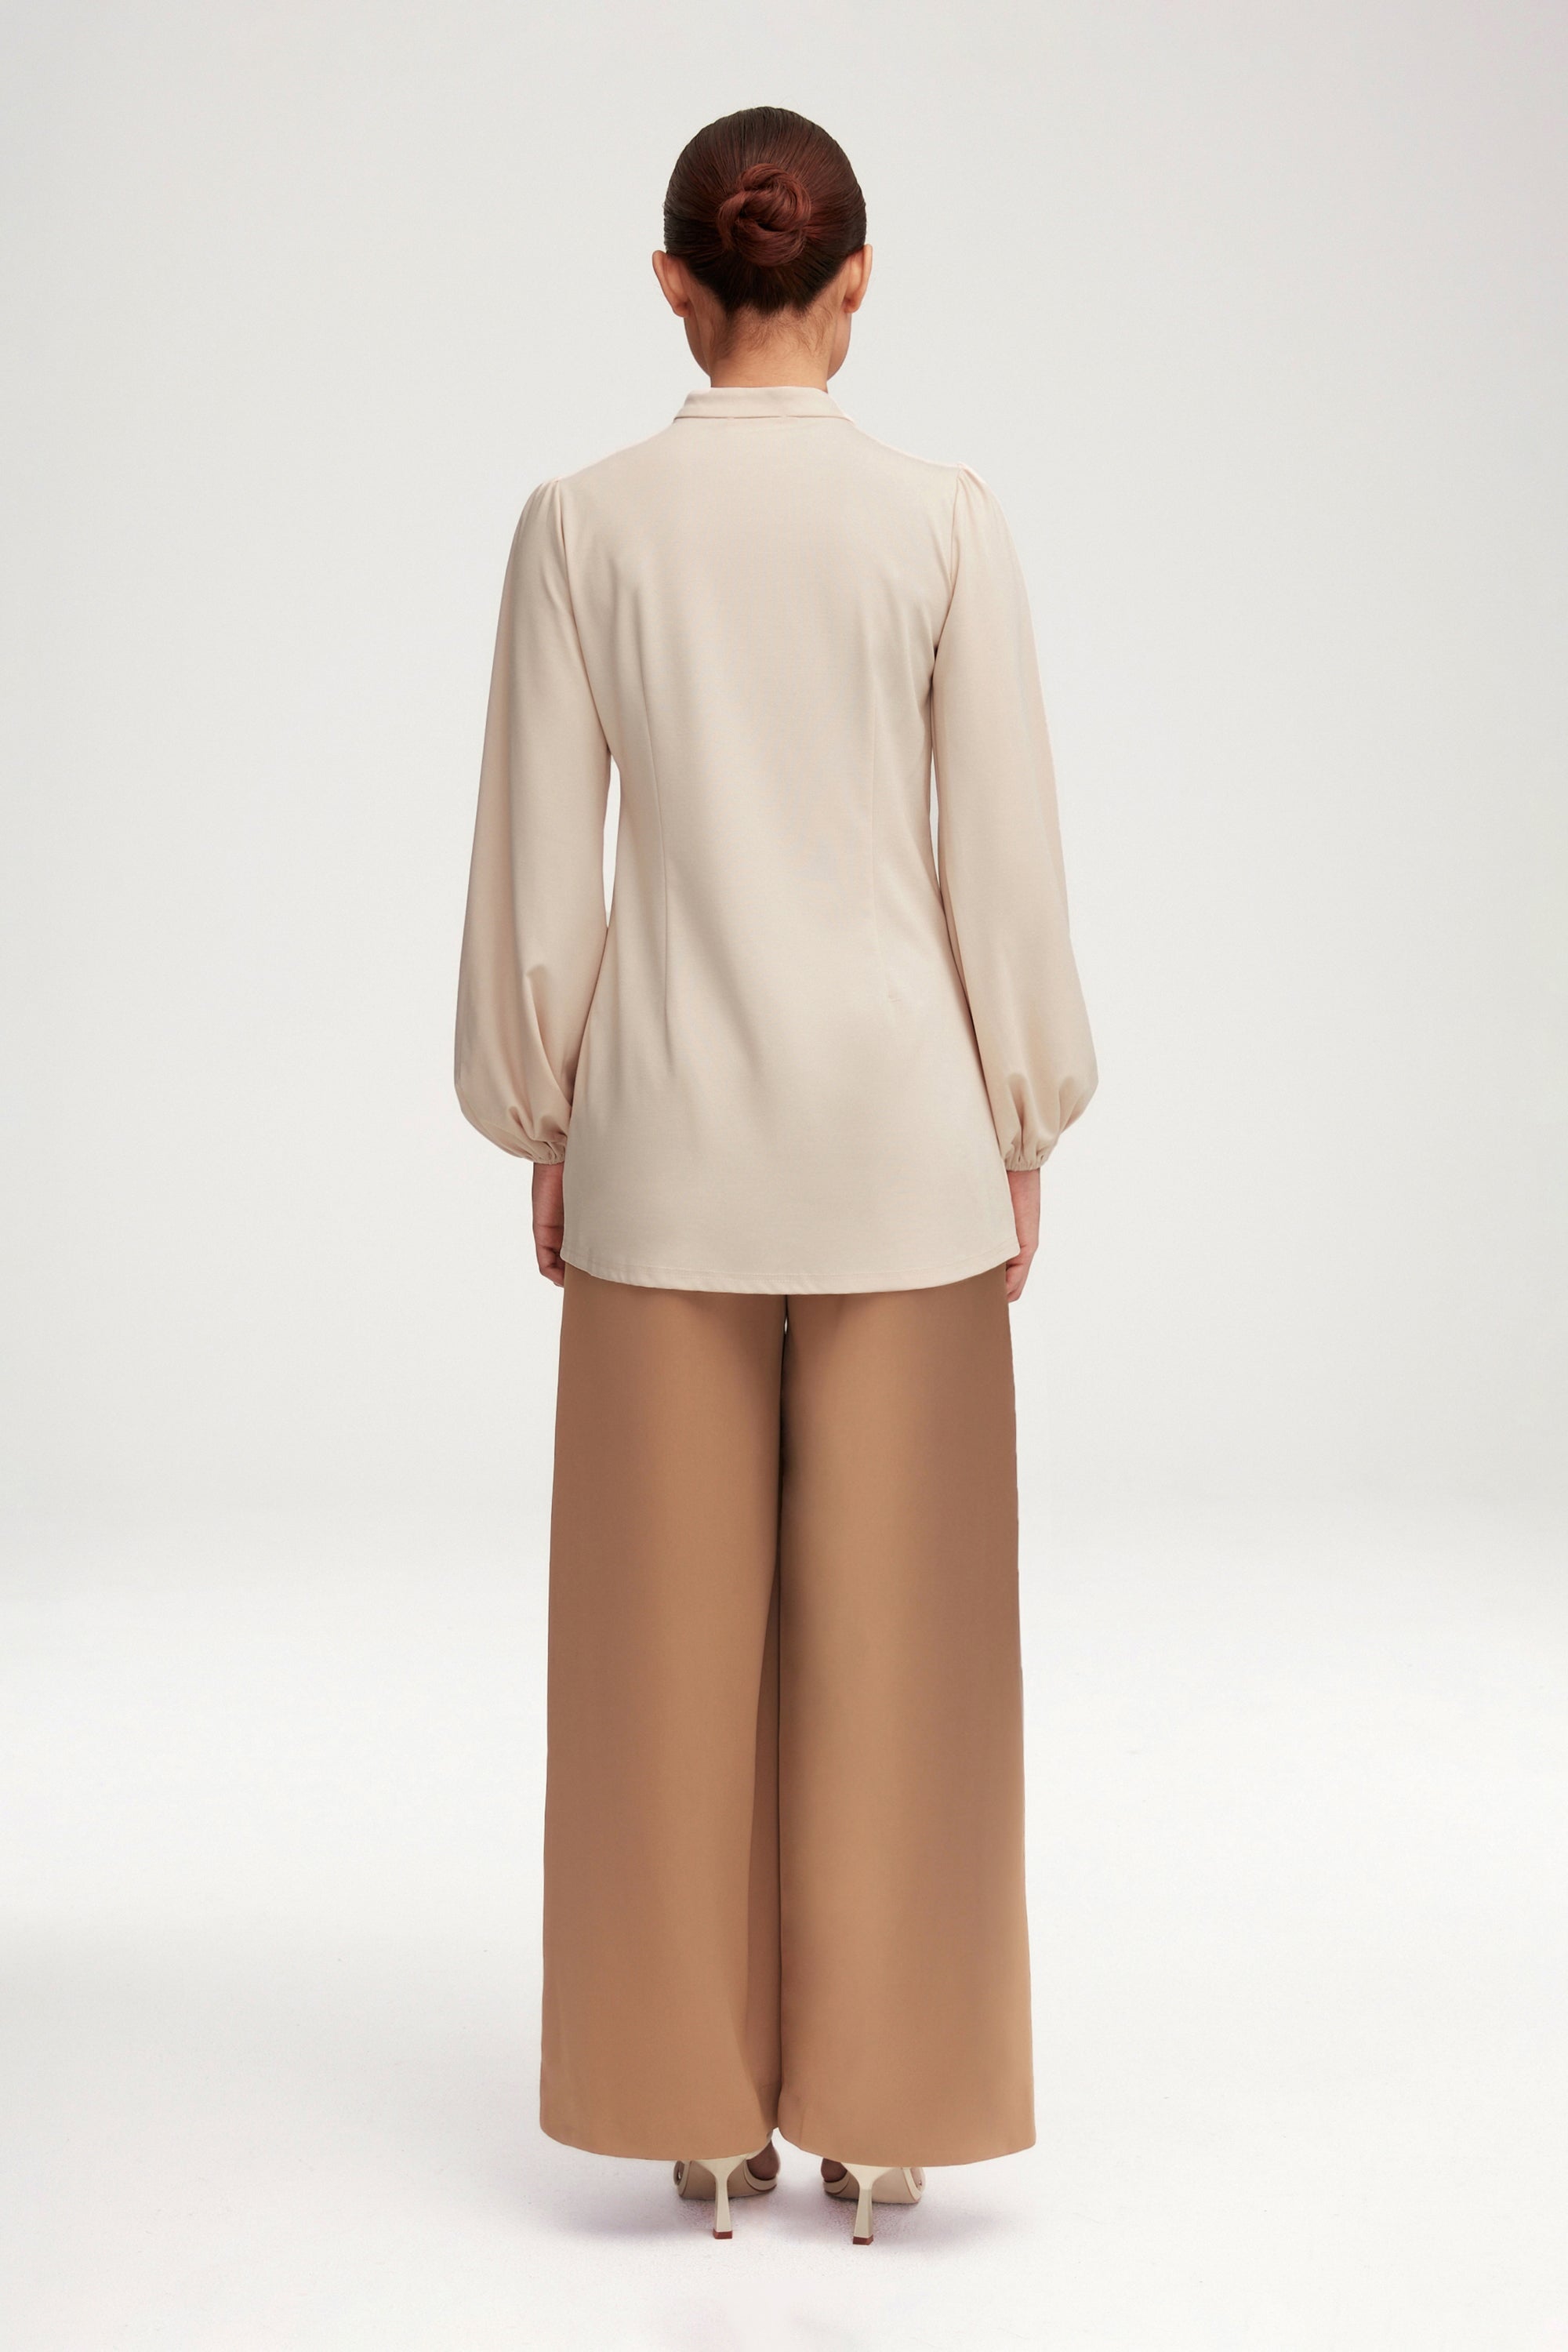 Rayana Jersey Button Down Top - Light Sand Clothing Veiled 